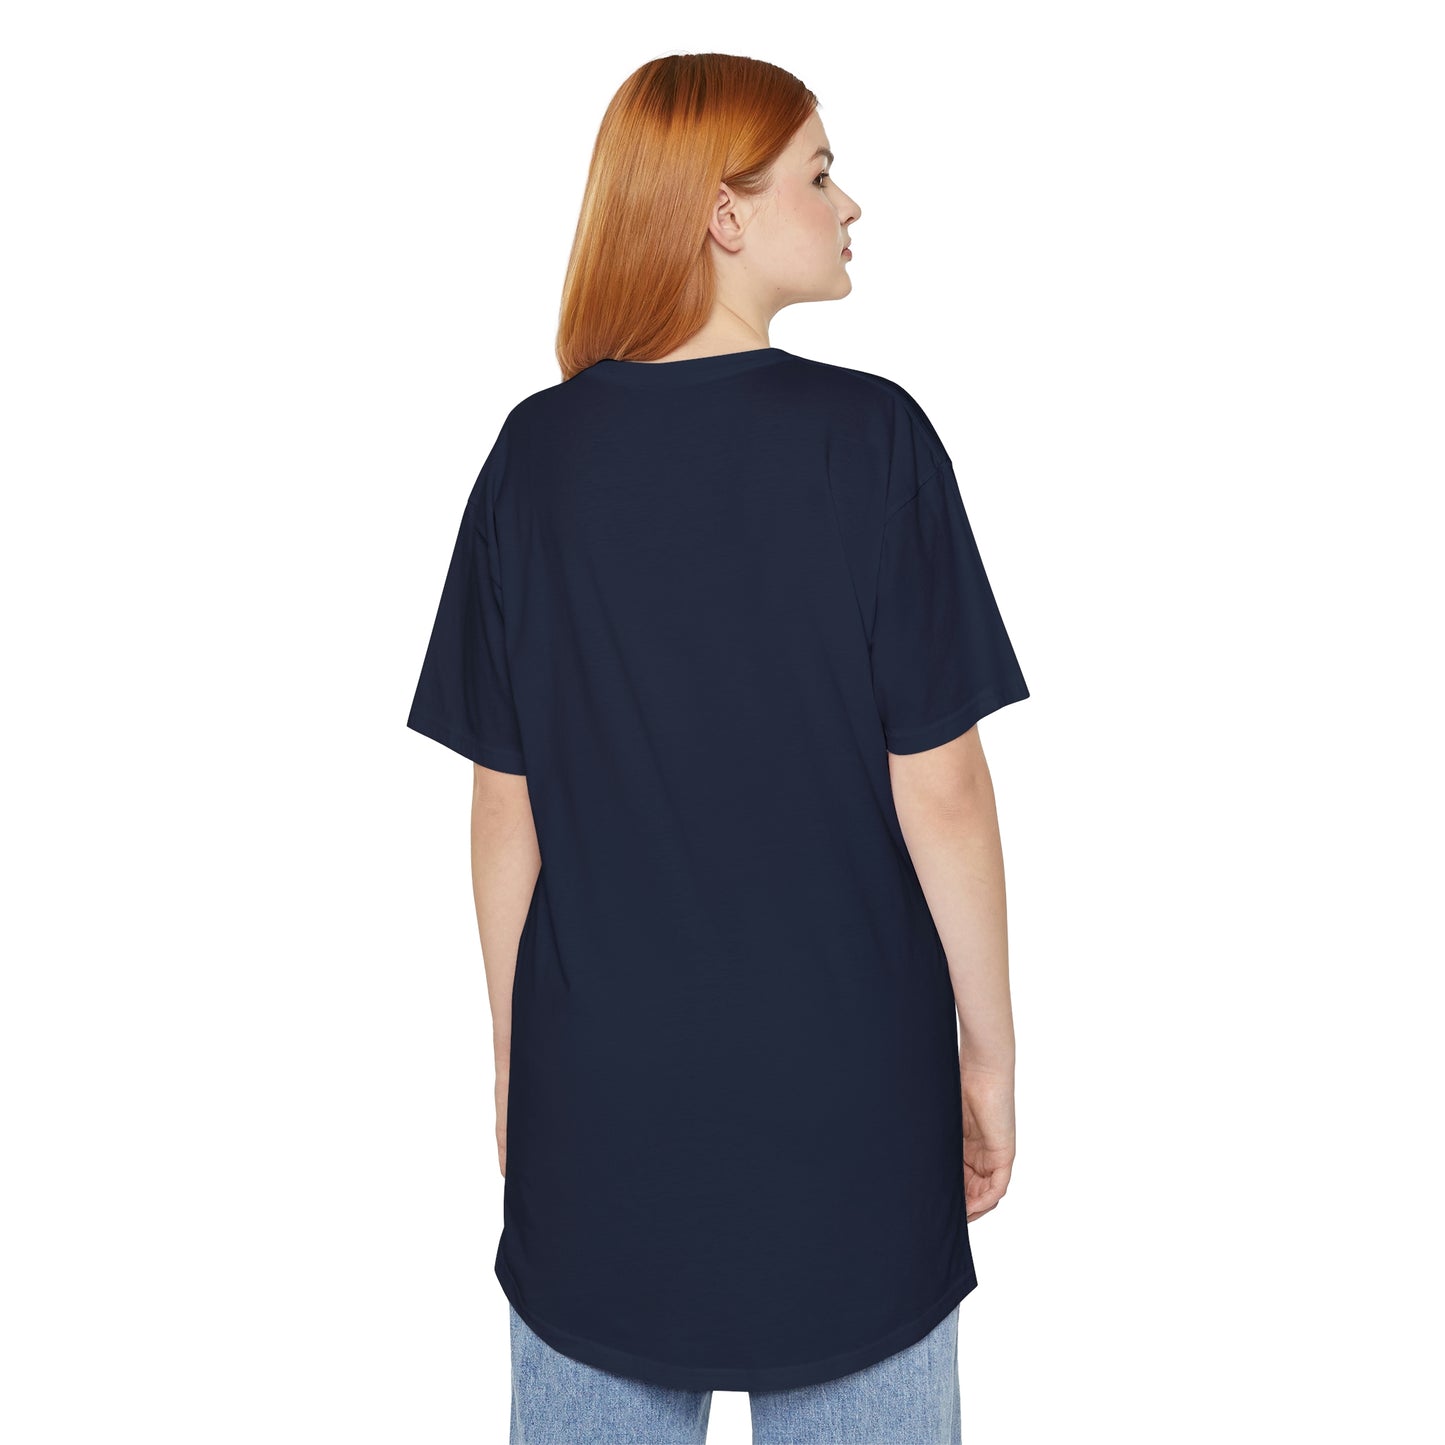 Mock up of a tall woman modeling the back of the Navy Blue T-shirt